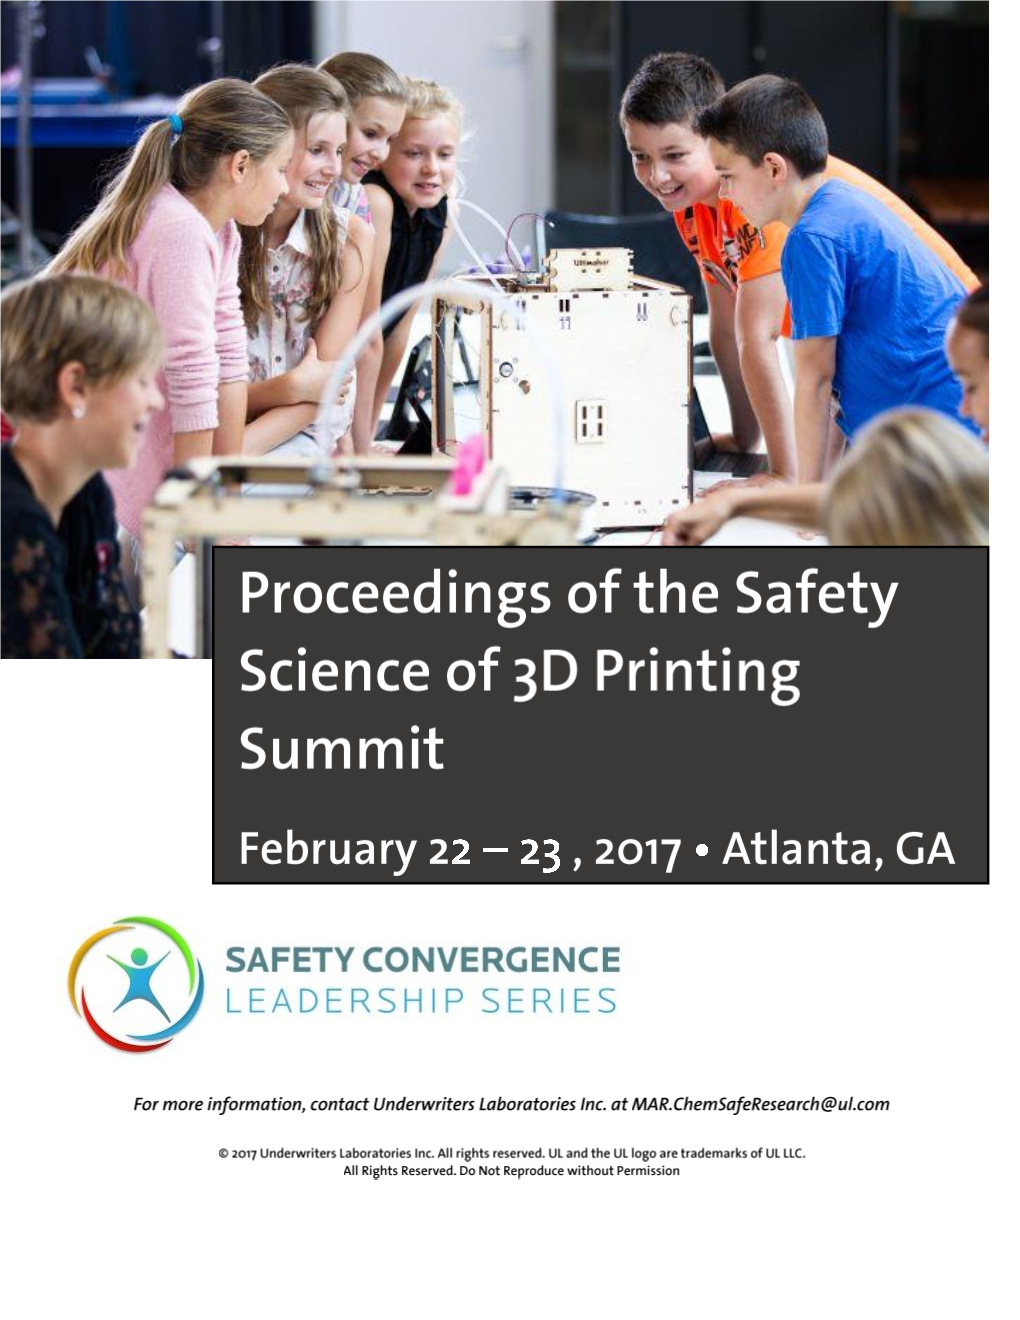 Proceedings of the Safety Science of 3D Printing 2017